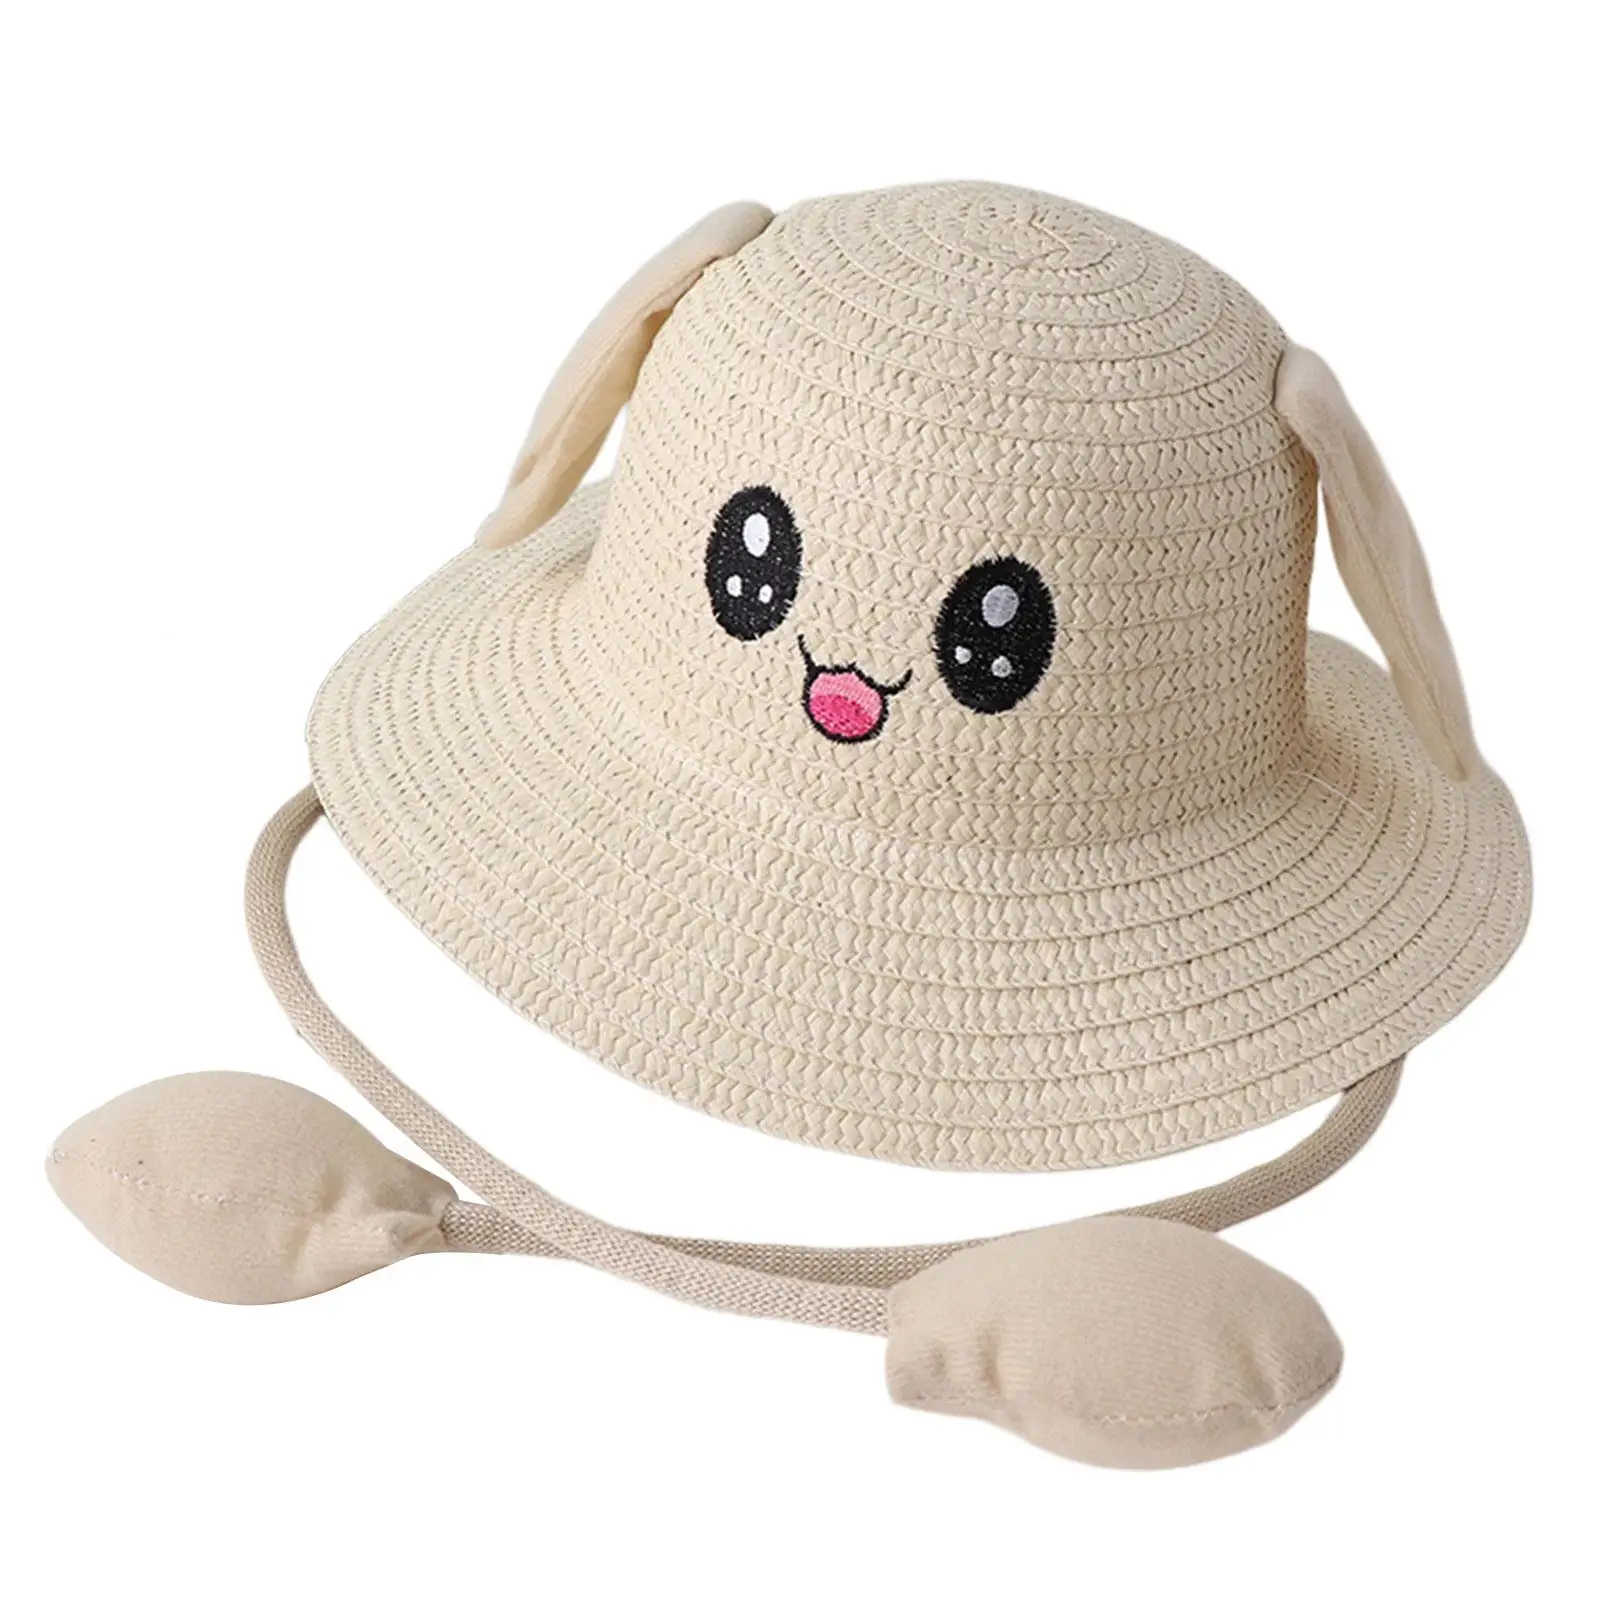 

Bunny Straw Hat Caps Cotton Fashionable Photo Props Wide Brim Protection Funny Sun Hat for Summer Outdoor Trips Dress up Street